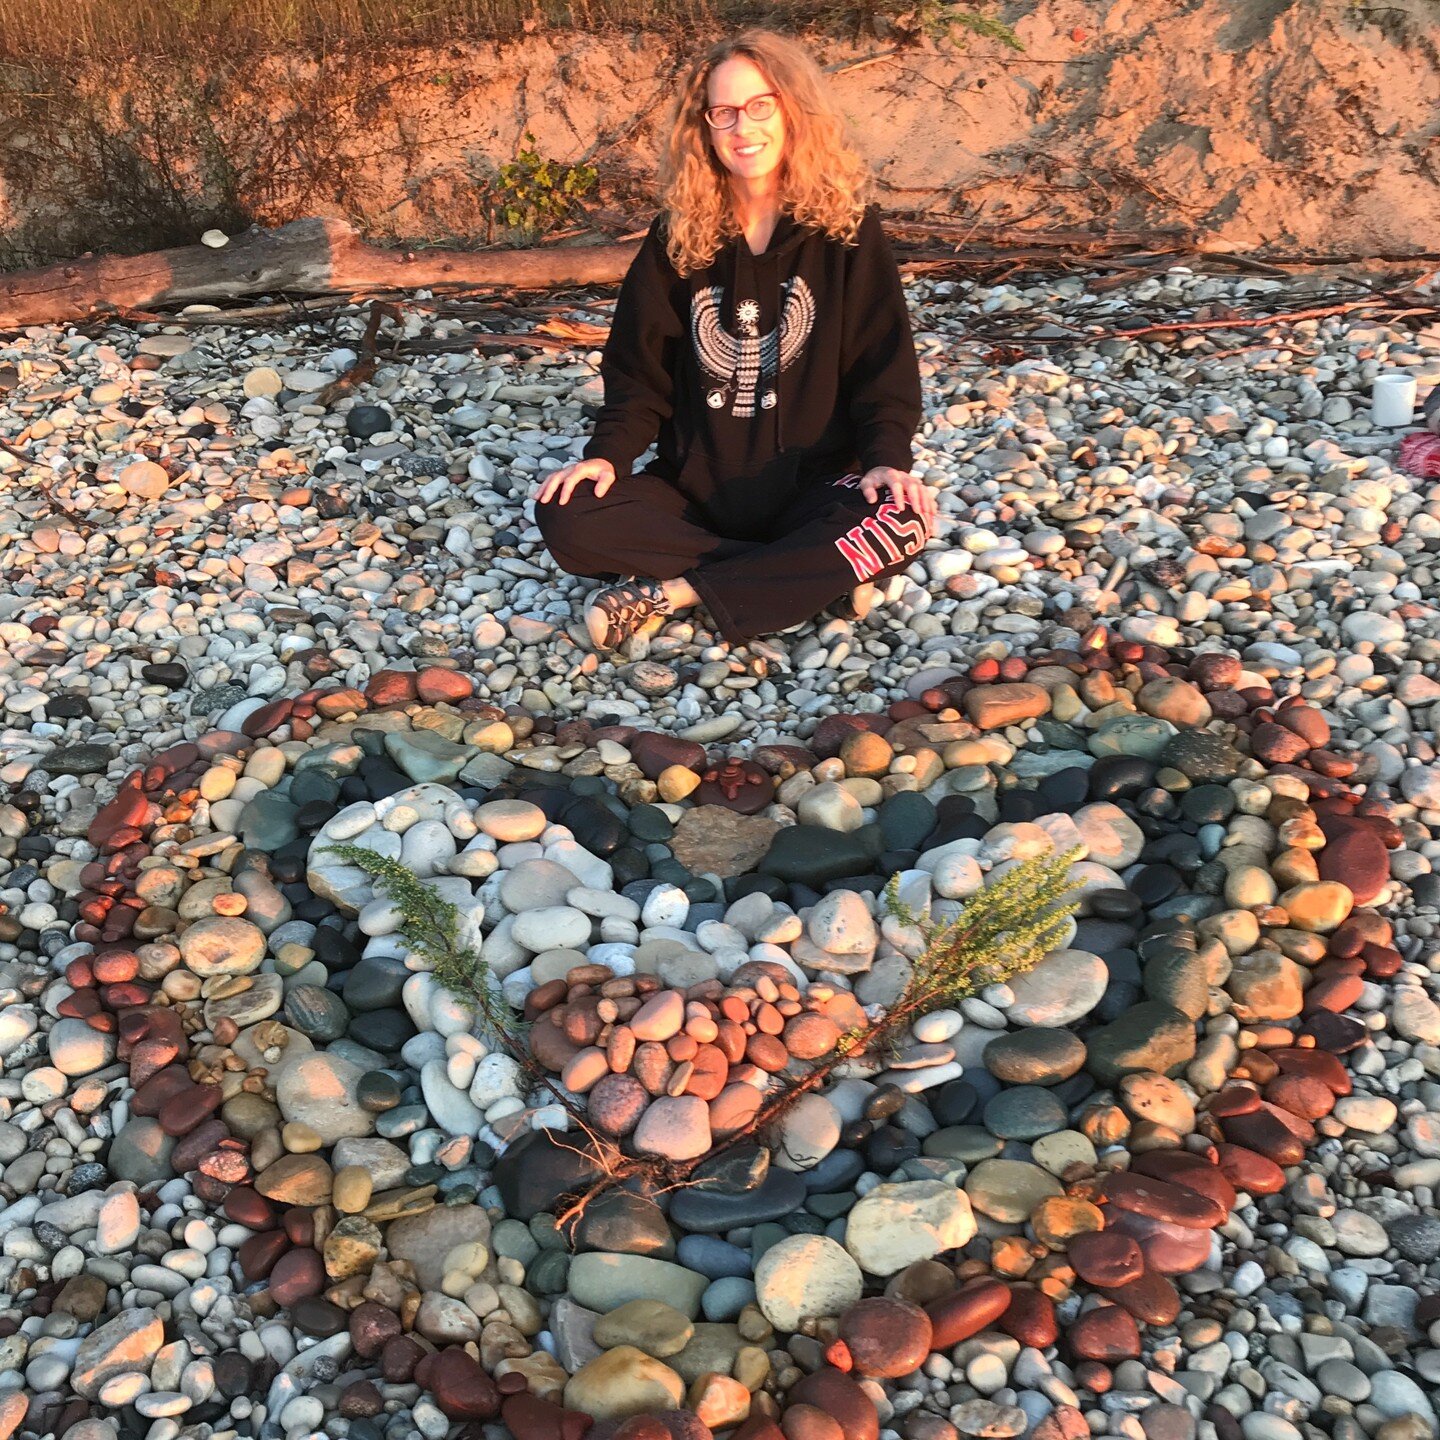 Hi friends! It's been a while since I've shared anything about myself or what all I do, so I thought I'd do an introduction! 
​
I'm Jessica, and I work full time as a Shamanic Practitioner. I work with groups, and I offer one-on-one healing sessions 